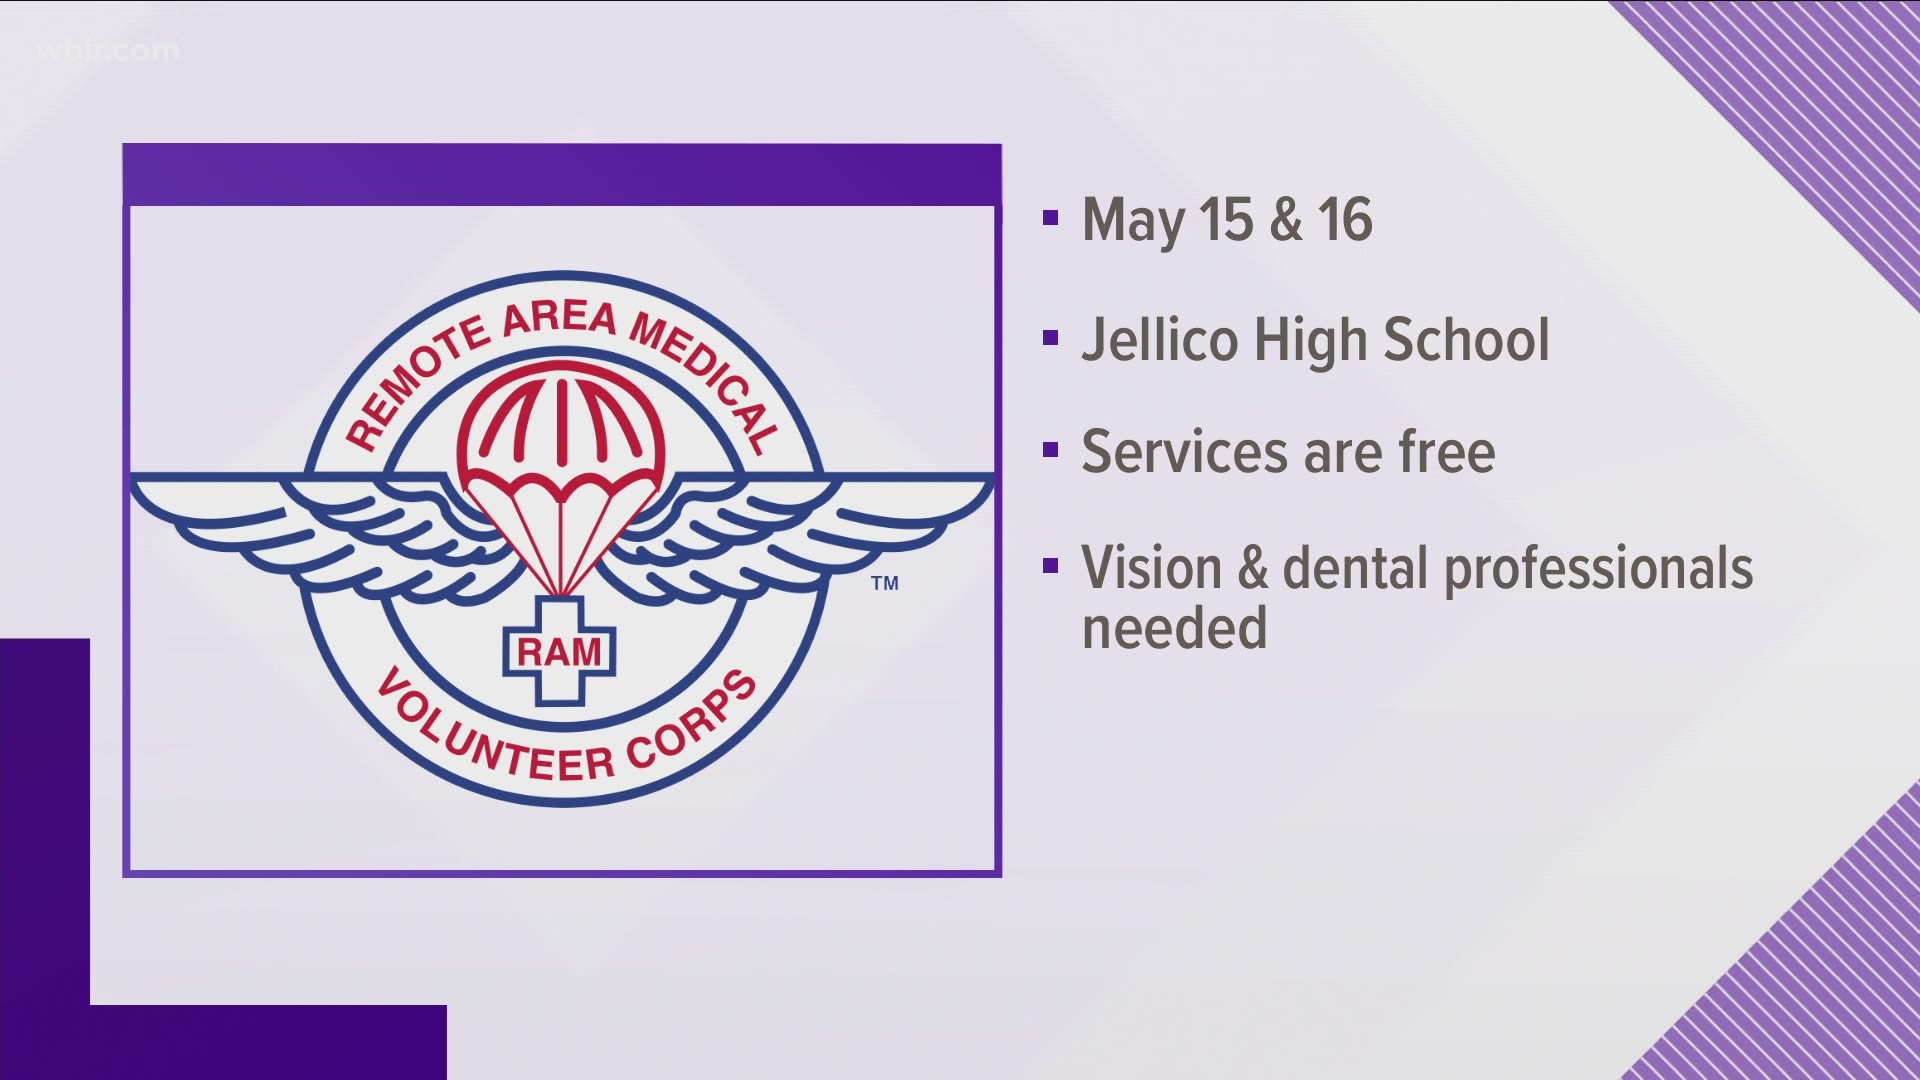 It's hosting a clinic in Jellico in May to provide free dental, vision and medical care.